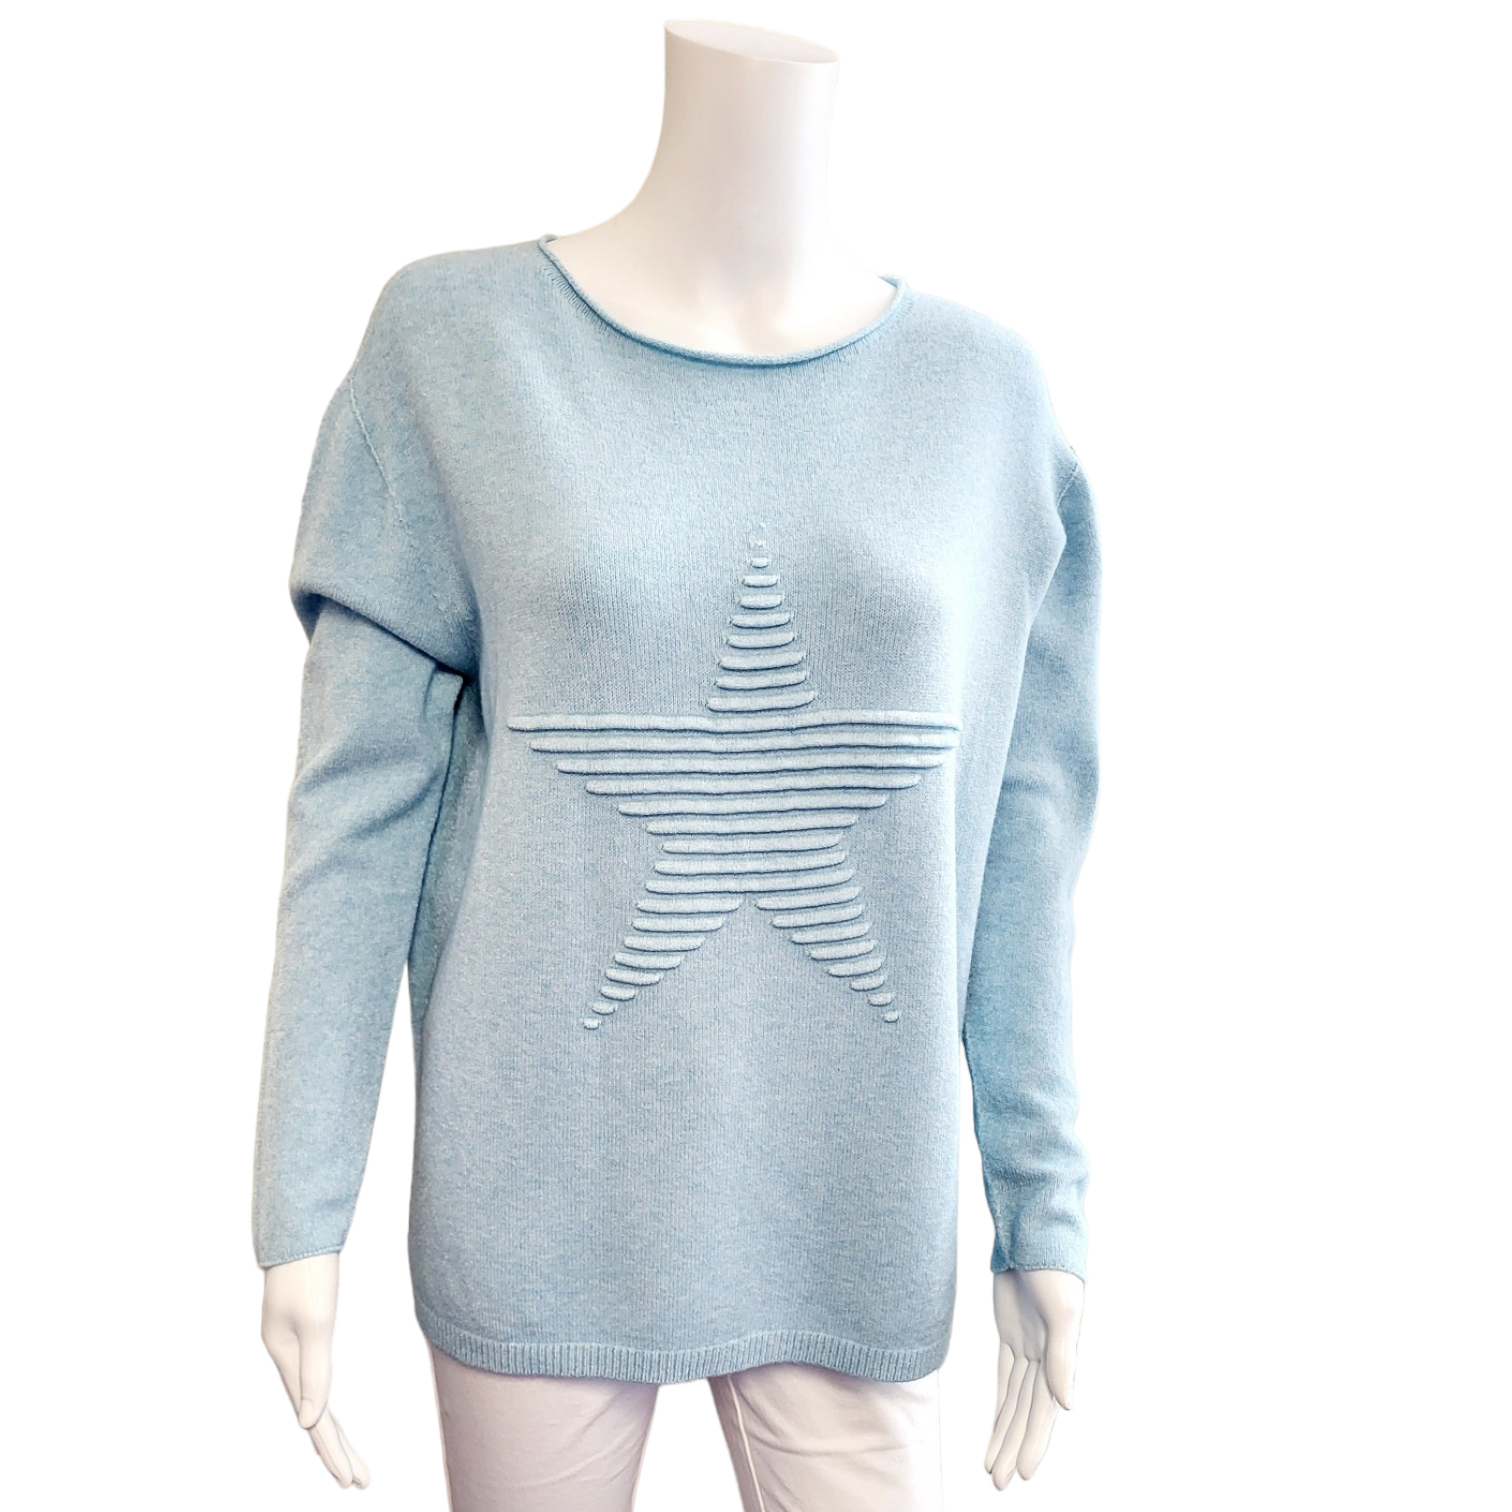 pale blue long sleeved jumper with round neck and large textured star detail